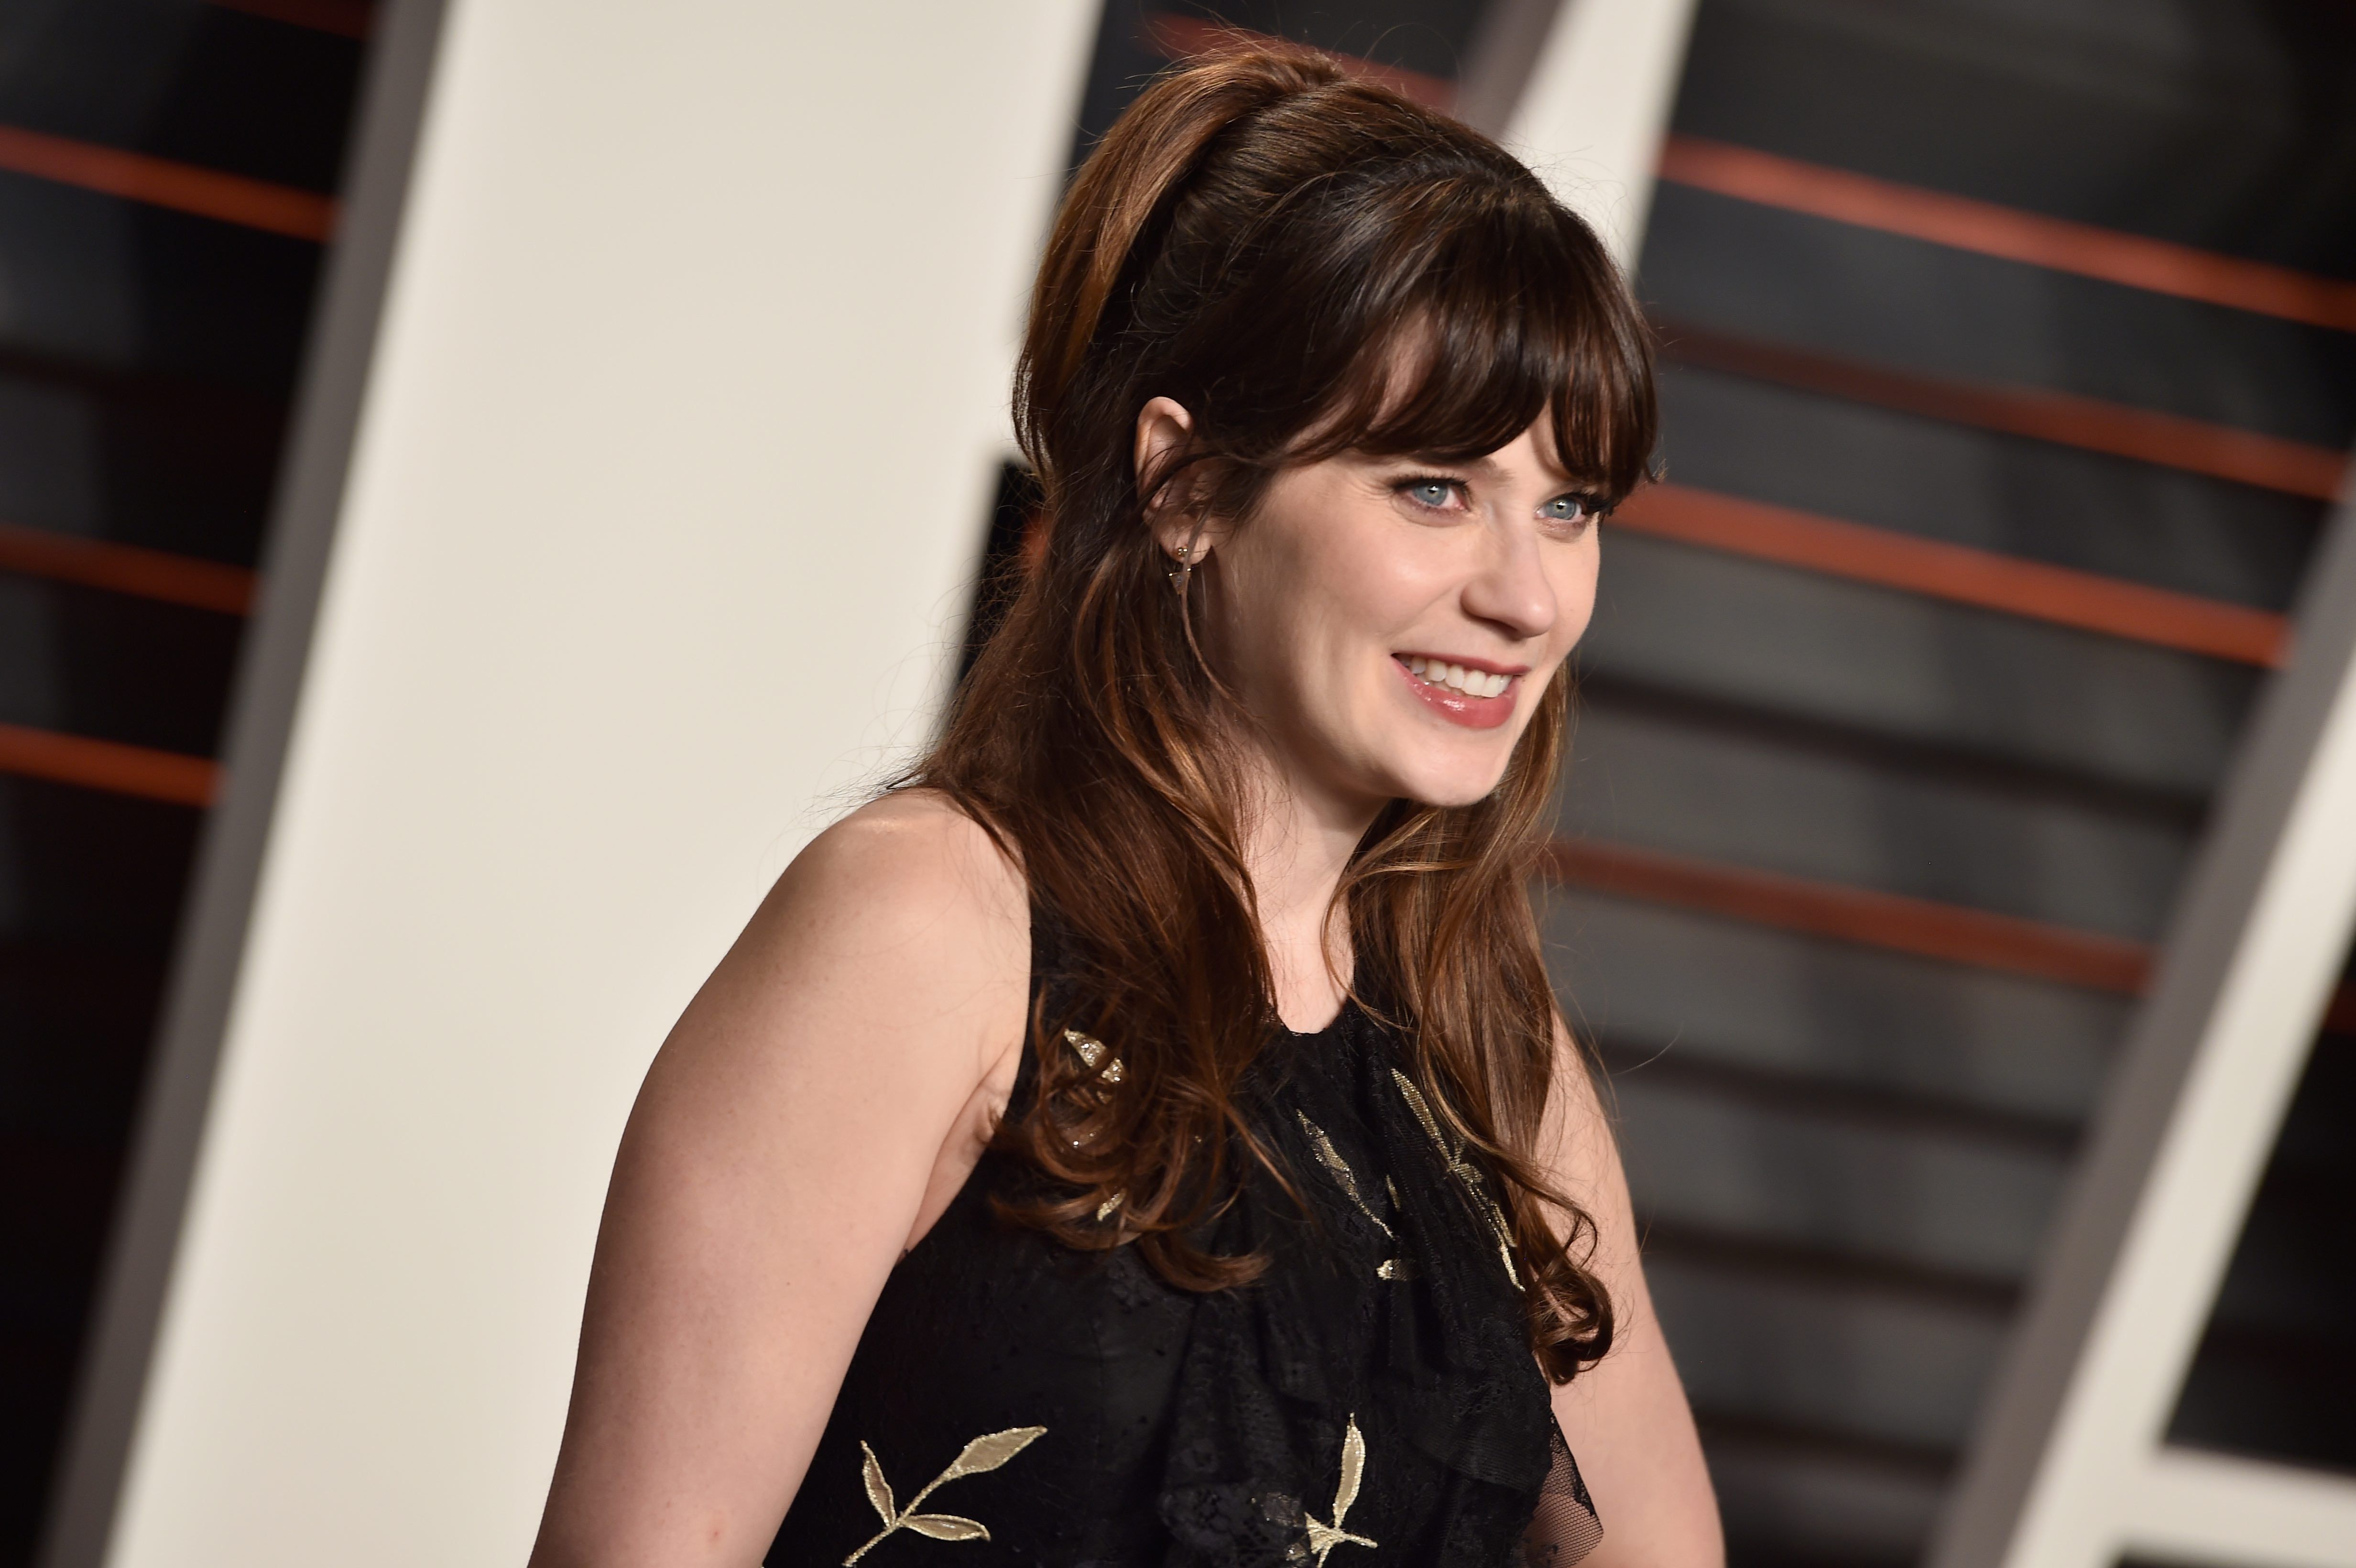 BEVERLY HILLS, CA - FEBRUARY 28: Actress Zooey Deschanel attends the 2016 Vanity Fair Oscar Party Hosted By Graydon Carter at the Wallis Annenberg Center for the Performing Arts on February 28, 2016 in Beverly Hills, California. (Photo by Pascal Le Segretain/Getty Images)